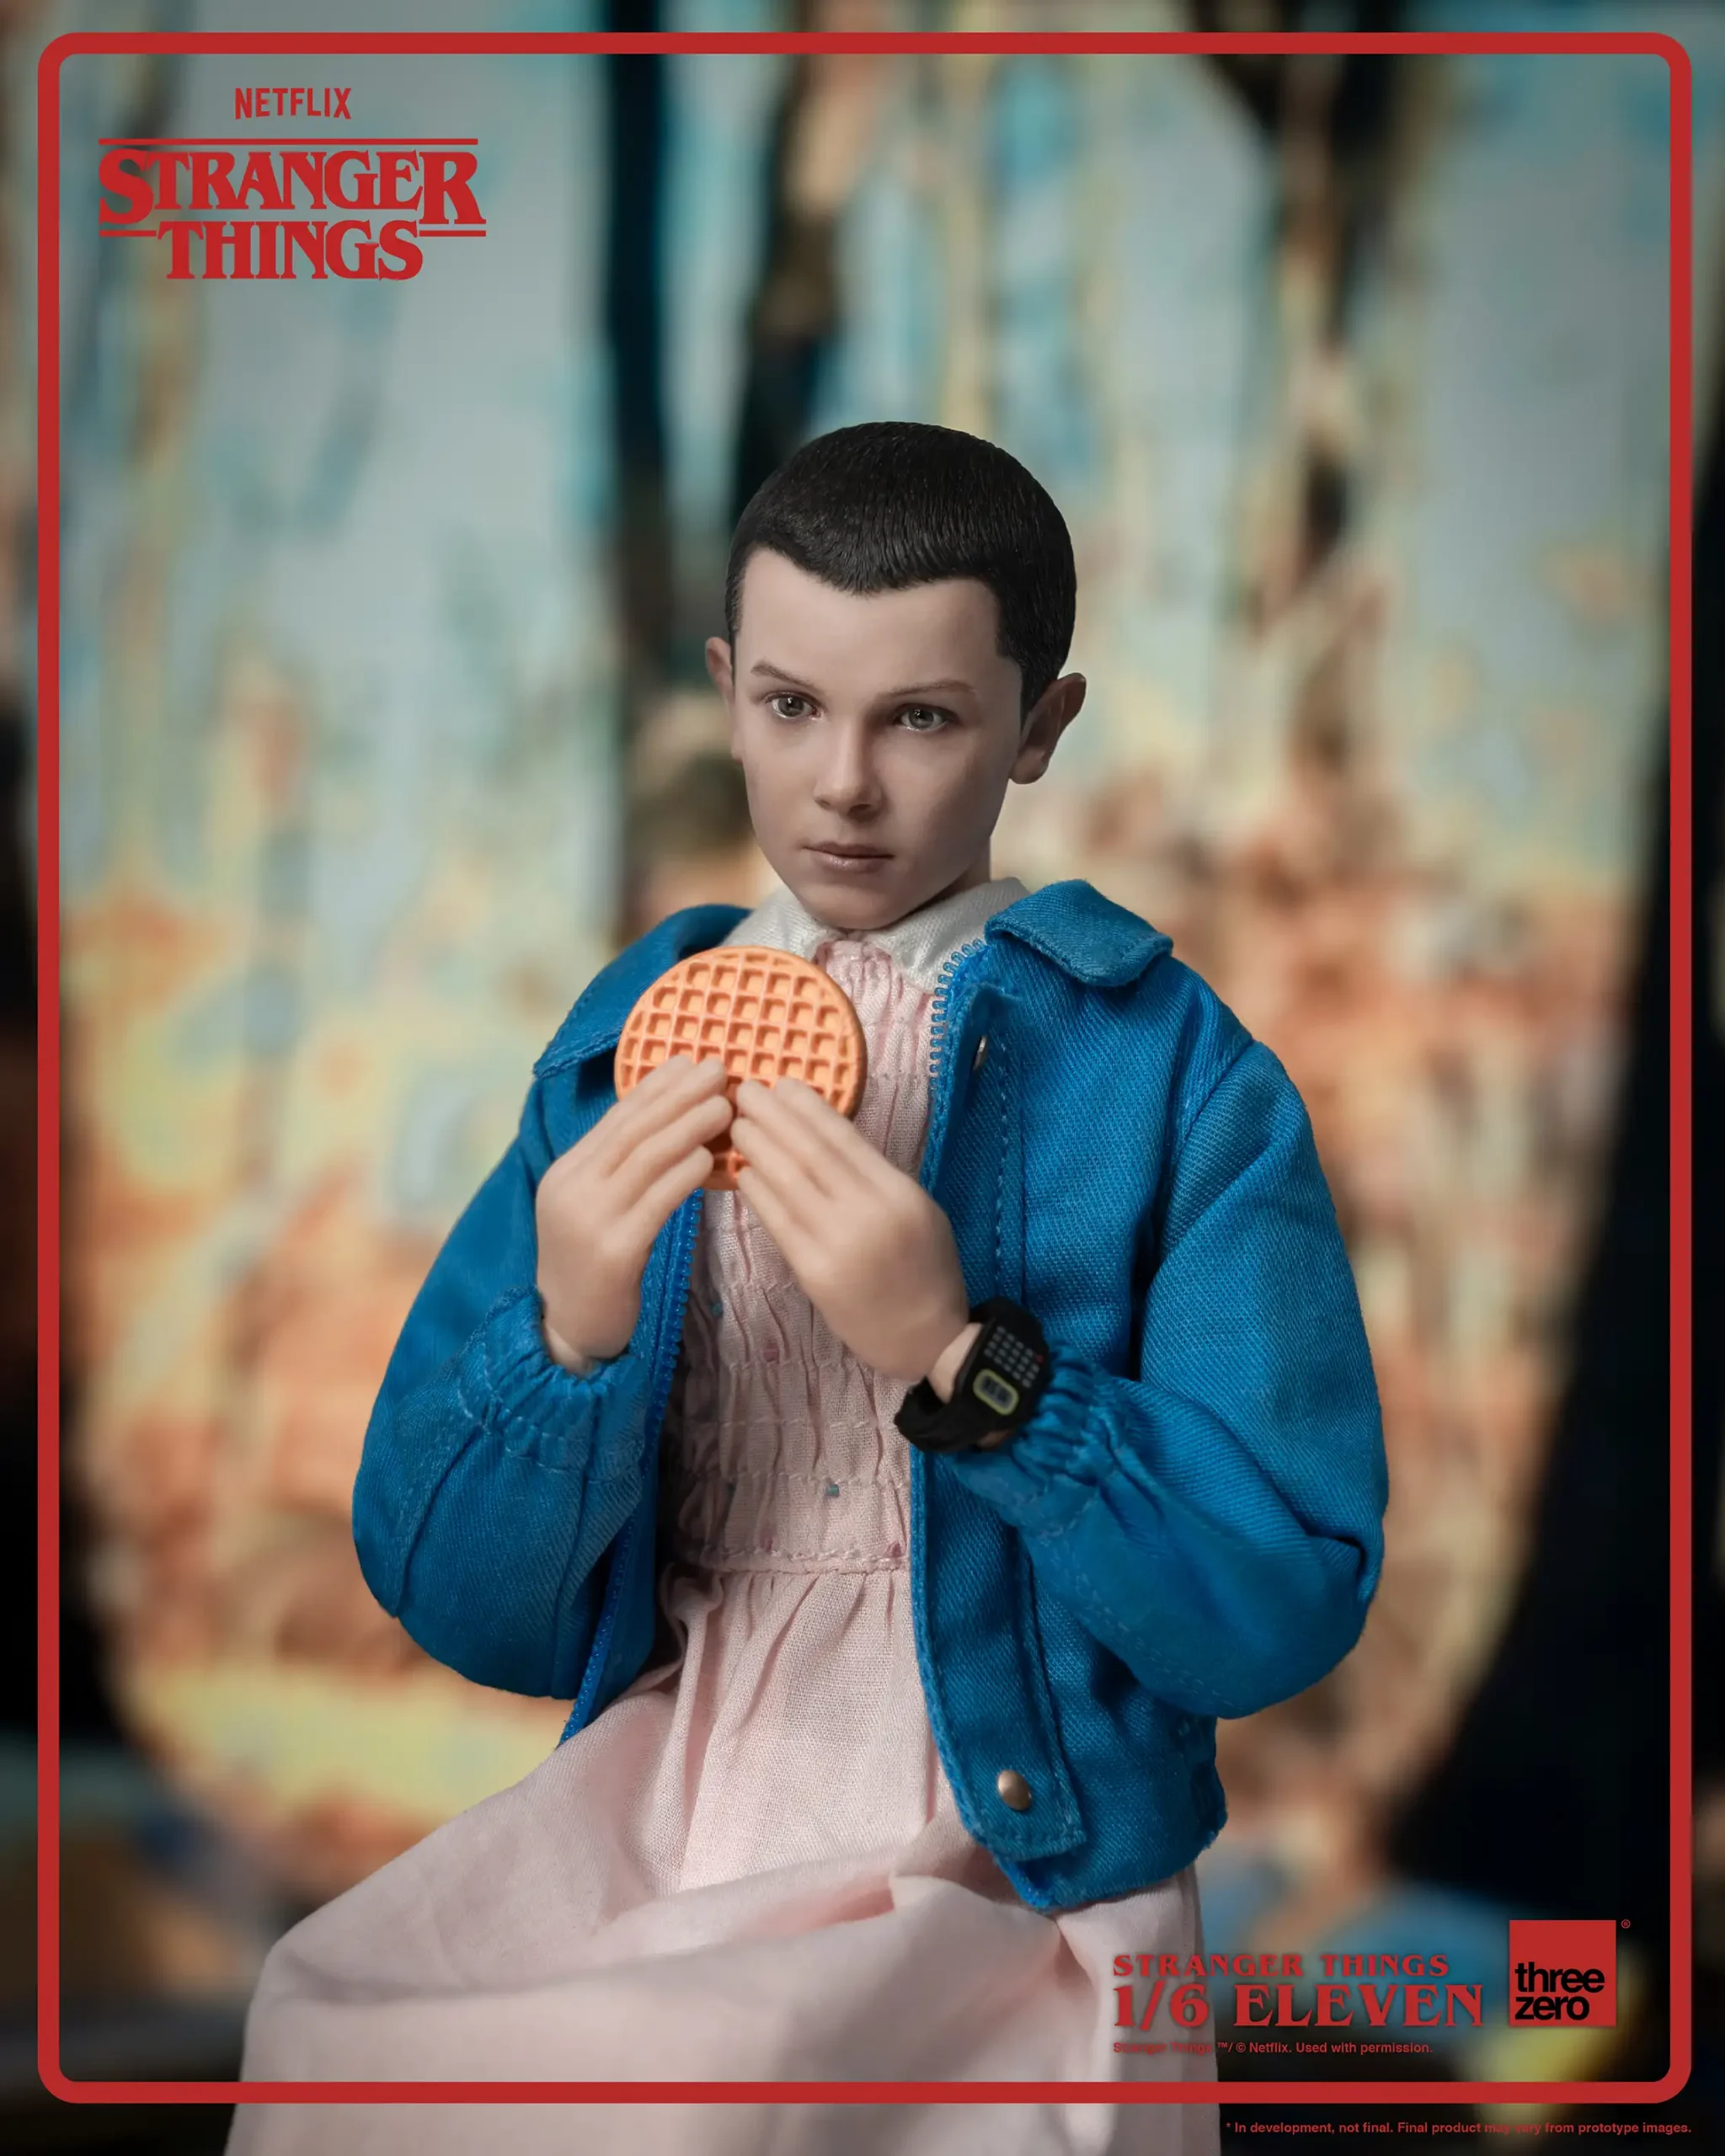 Stranger Things' Comics Head to Russia in New Series